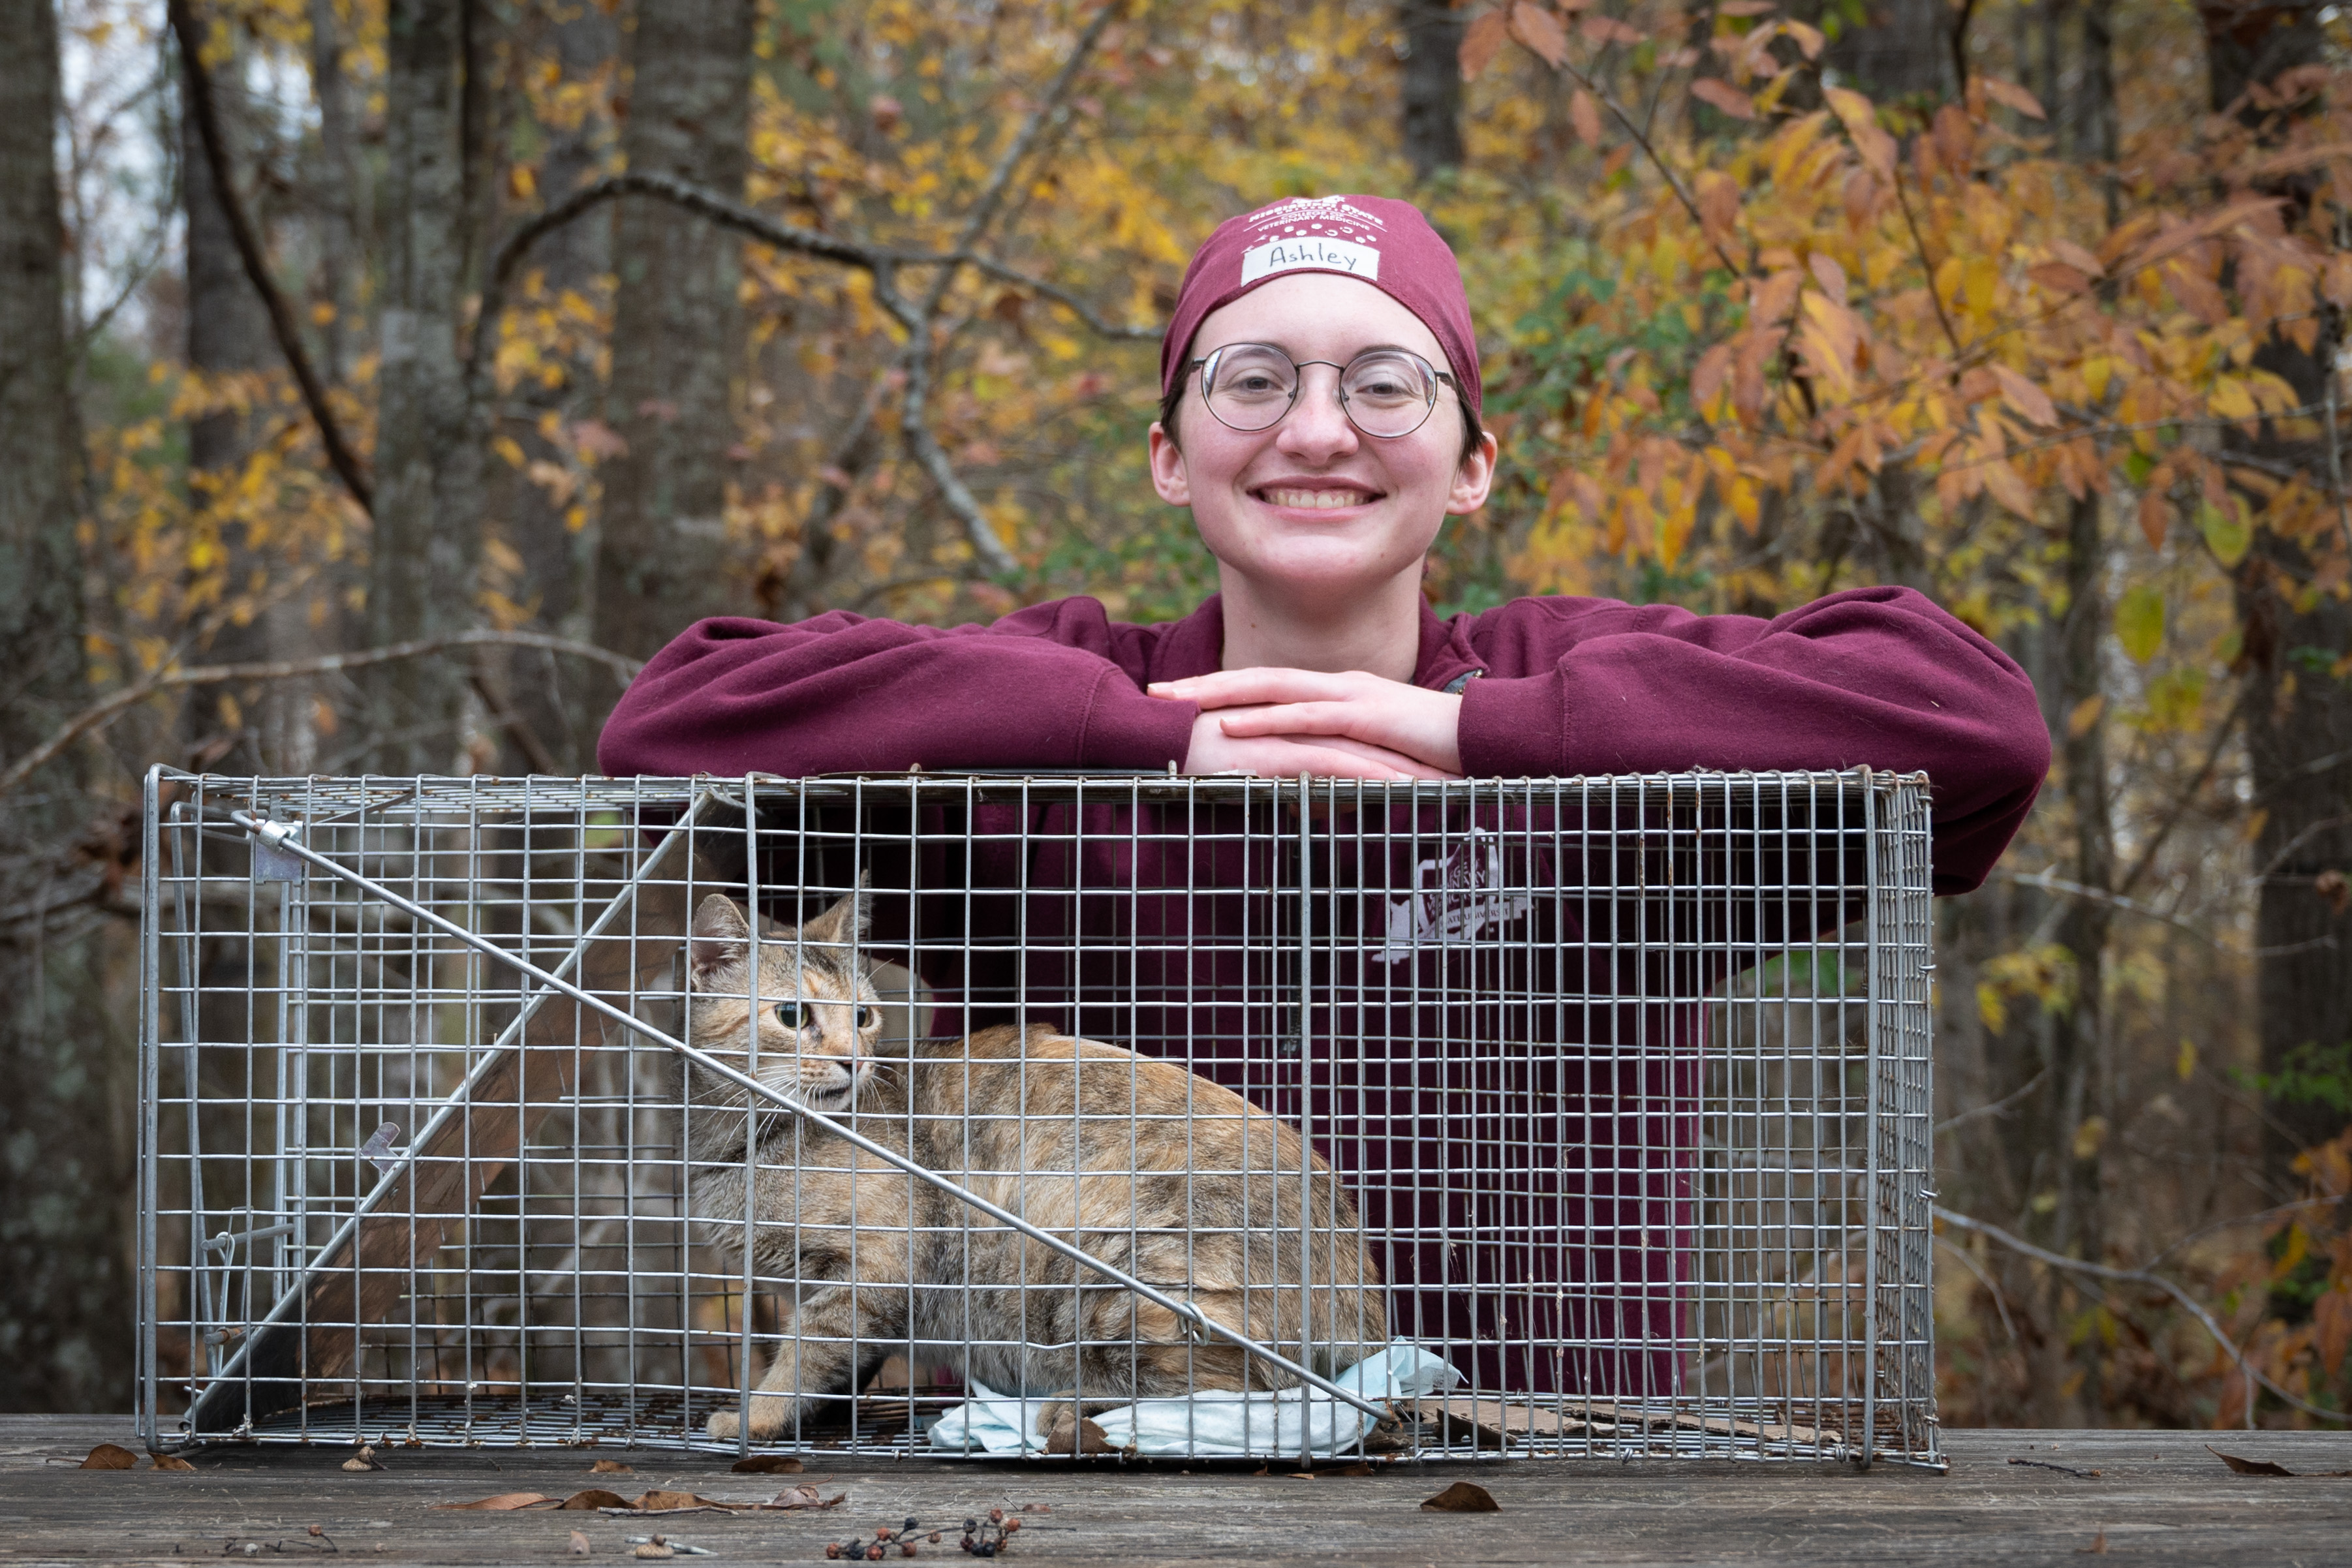 Ashley poses with her 500th surgery patient - a feral cat